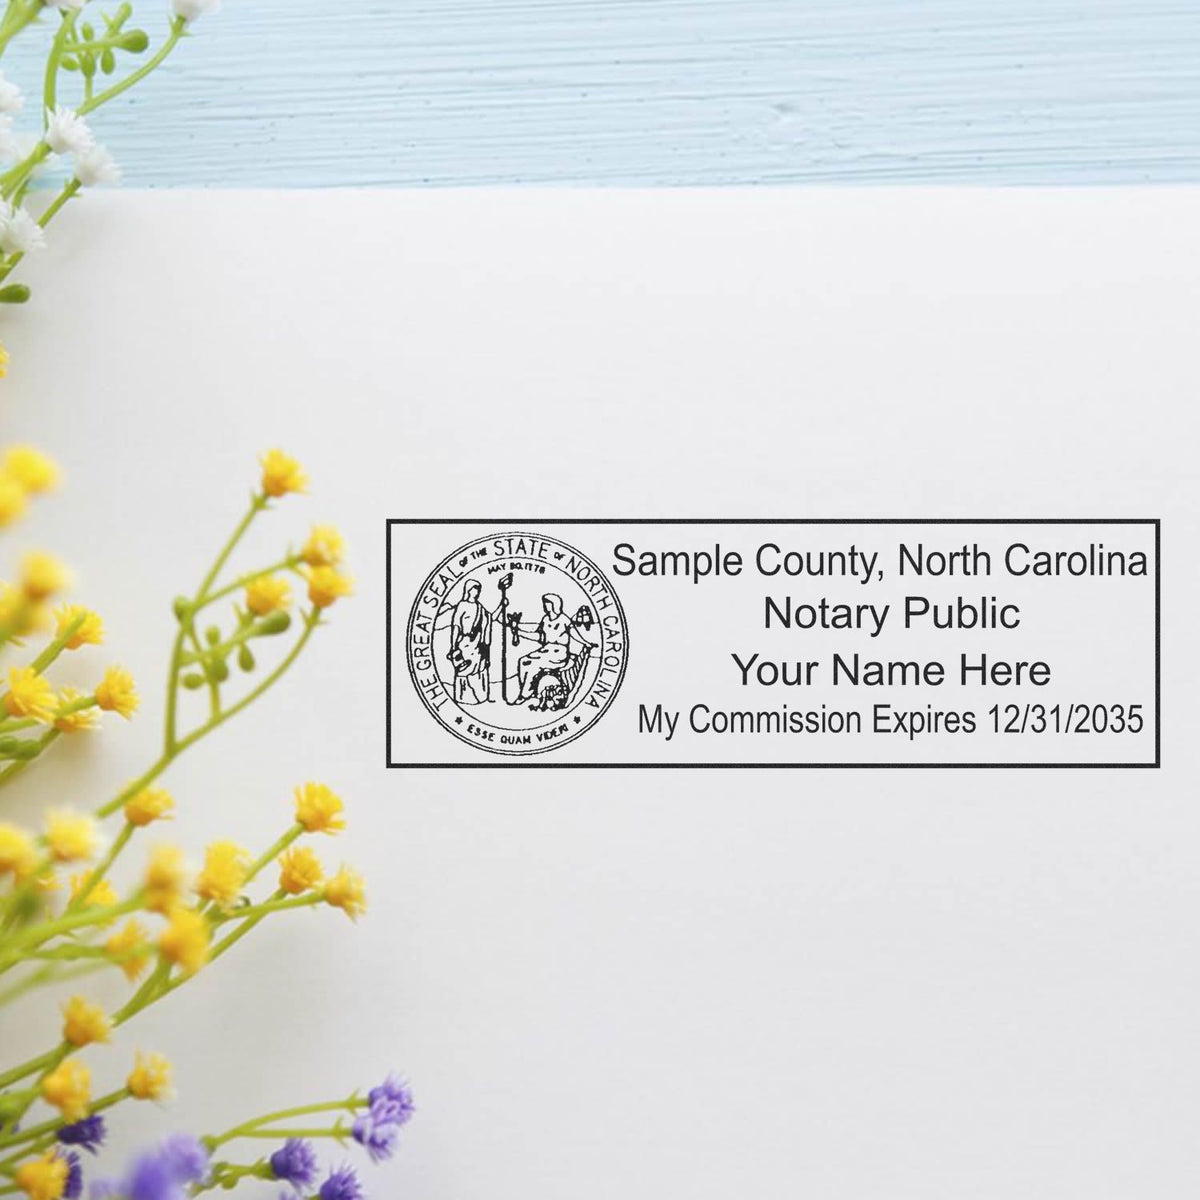 An alternative view of the PSI North Carolina Notary Stamp stamped on a sheet of paper showing the image in use